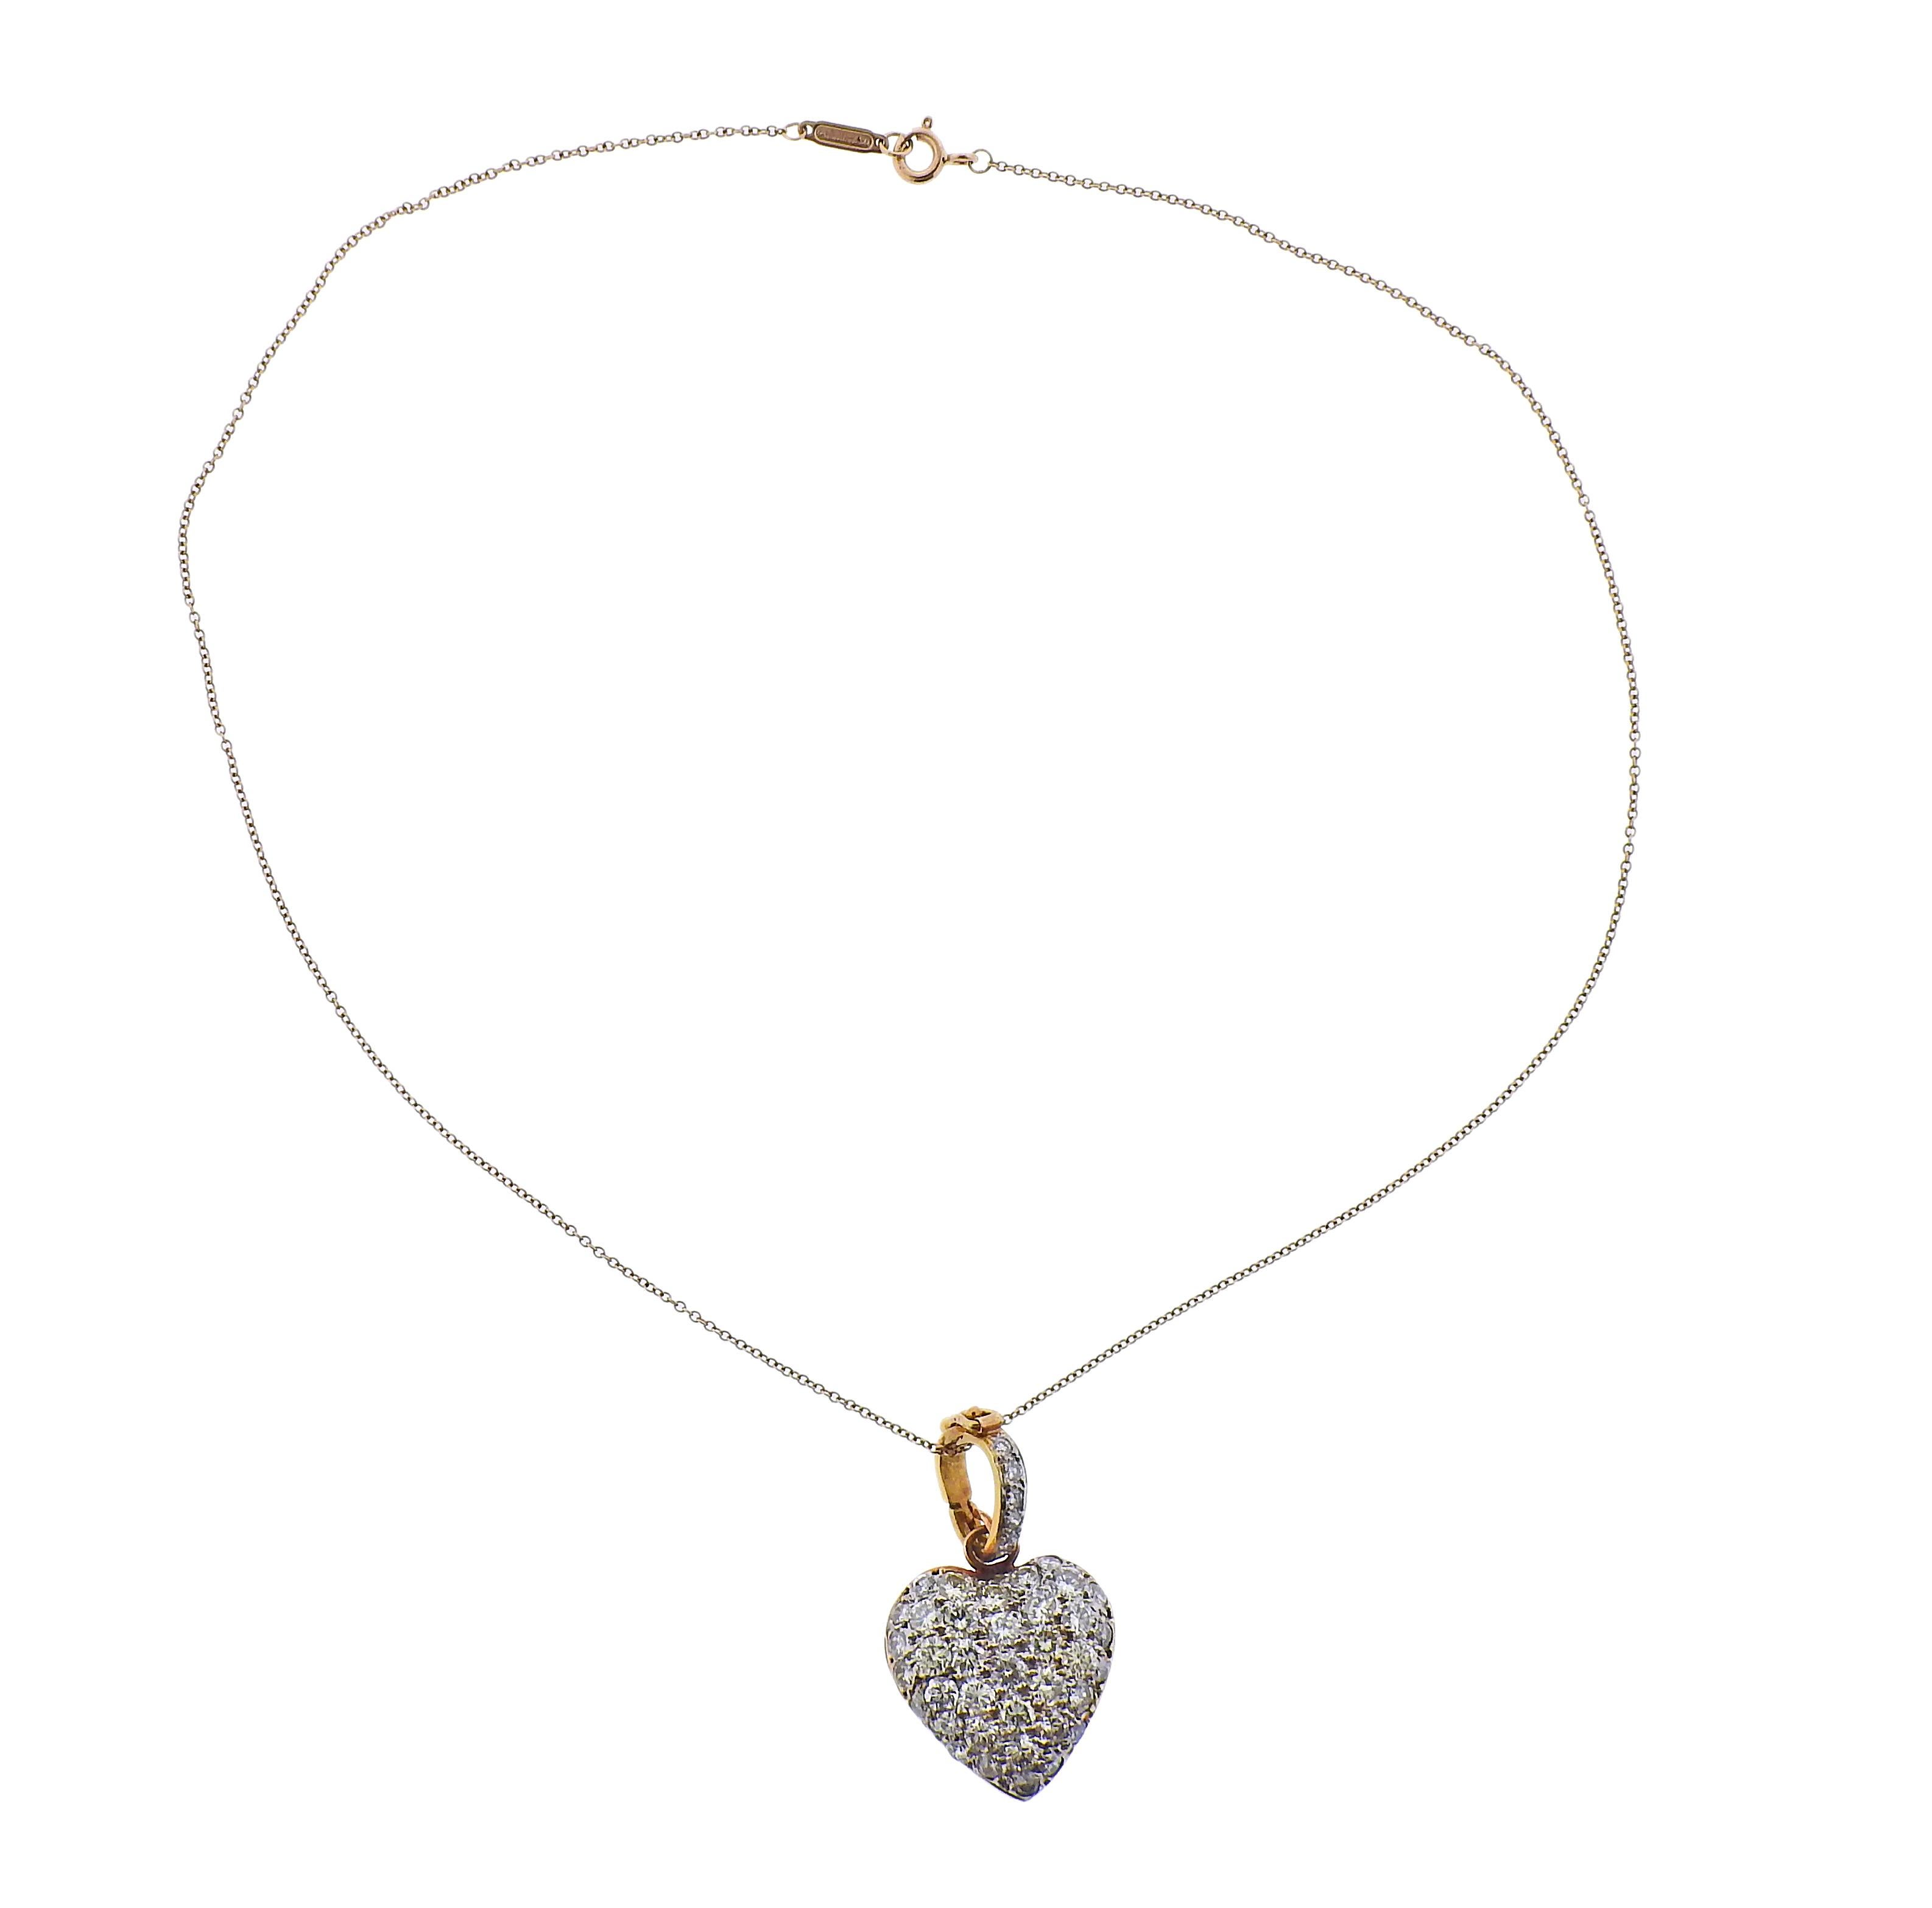 18k gold Tiffany & Co necklace chain, with a 18k gold heart pendant, set with approx. 3.80-4.00ctw in diamonds. Necklace is 16